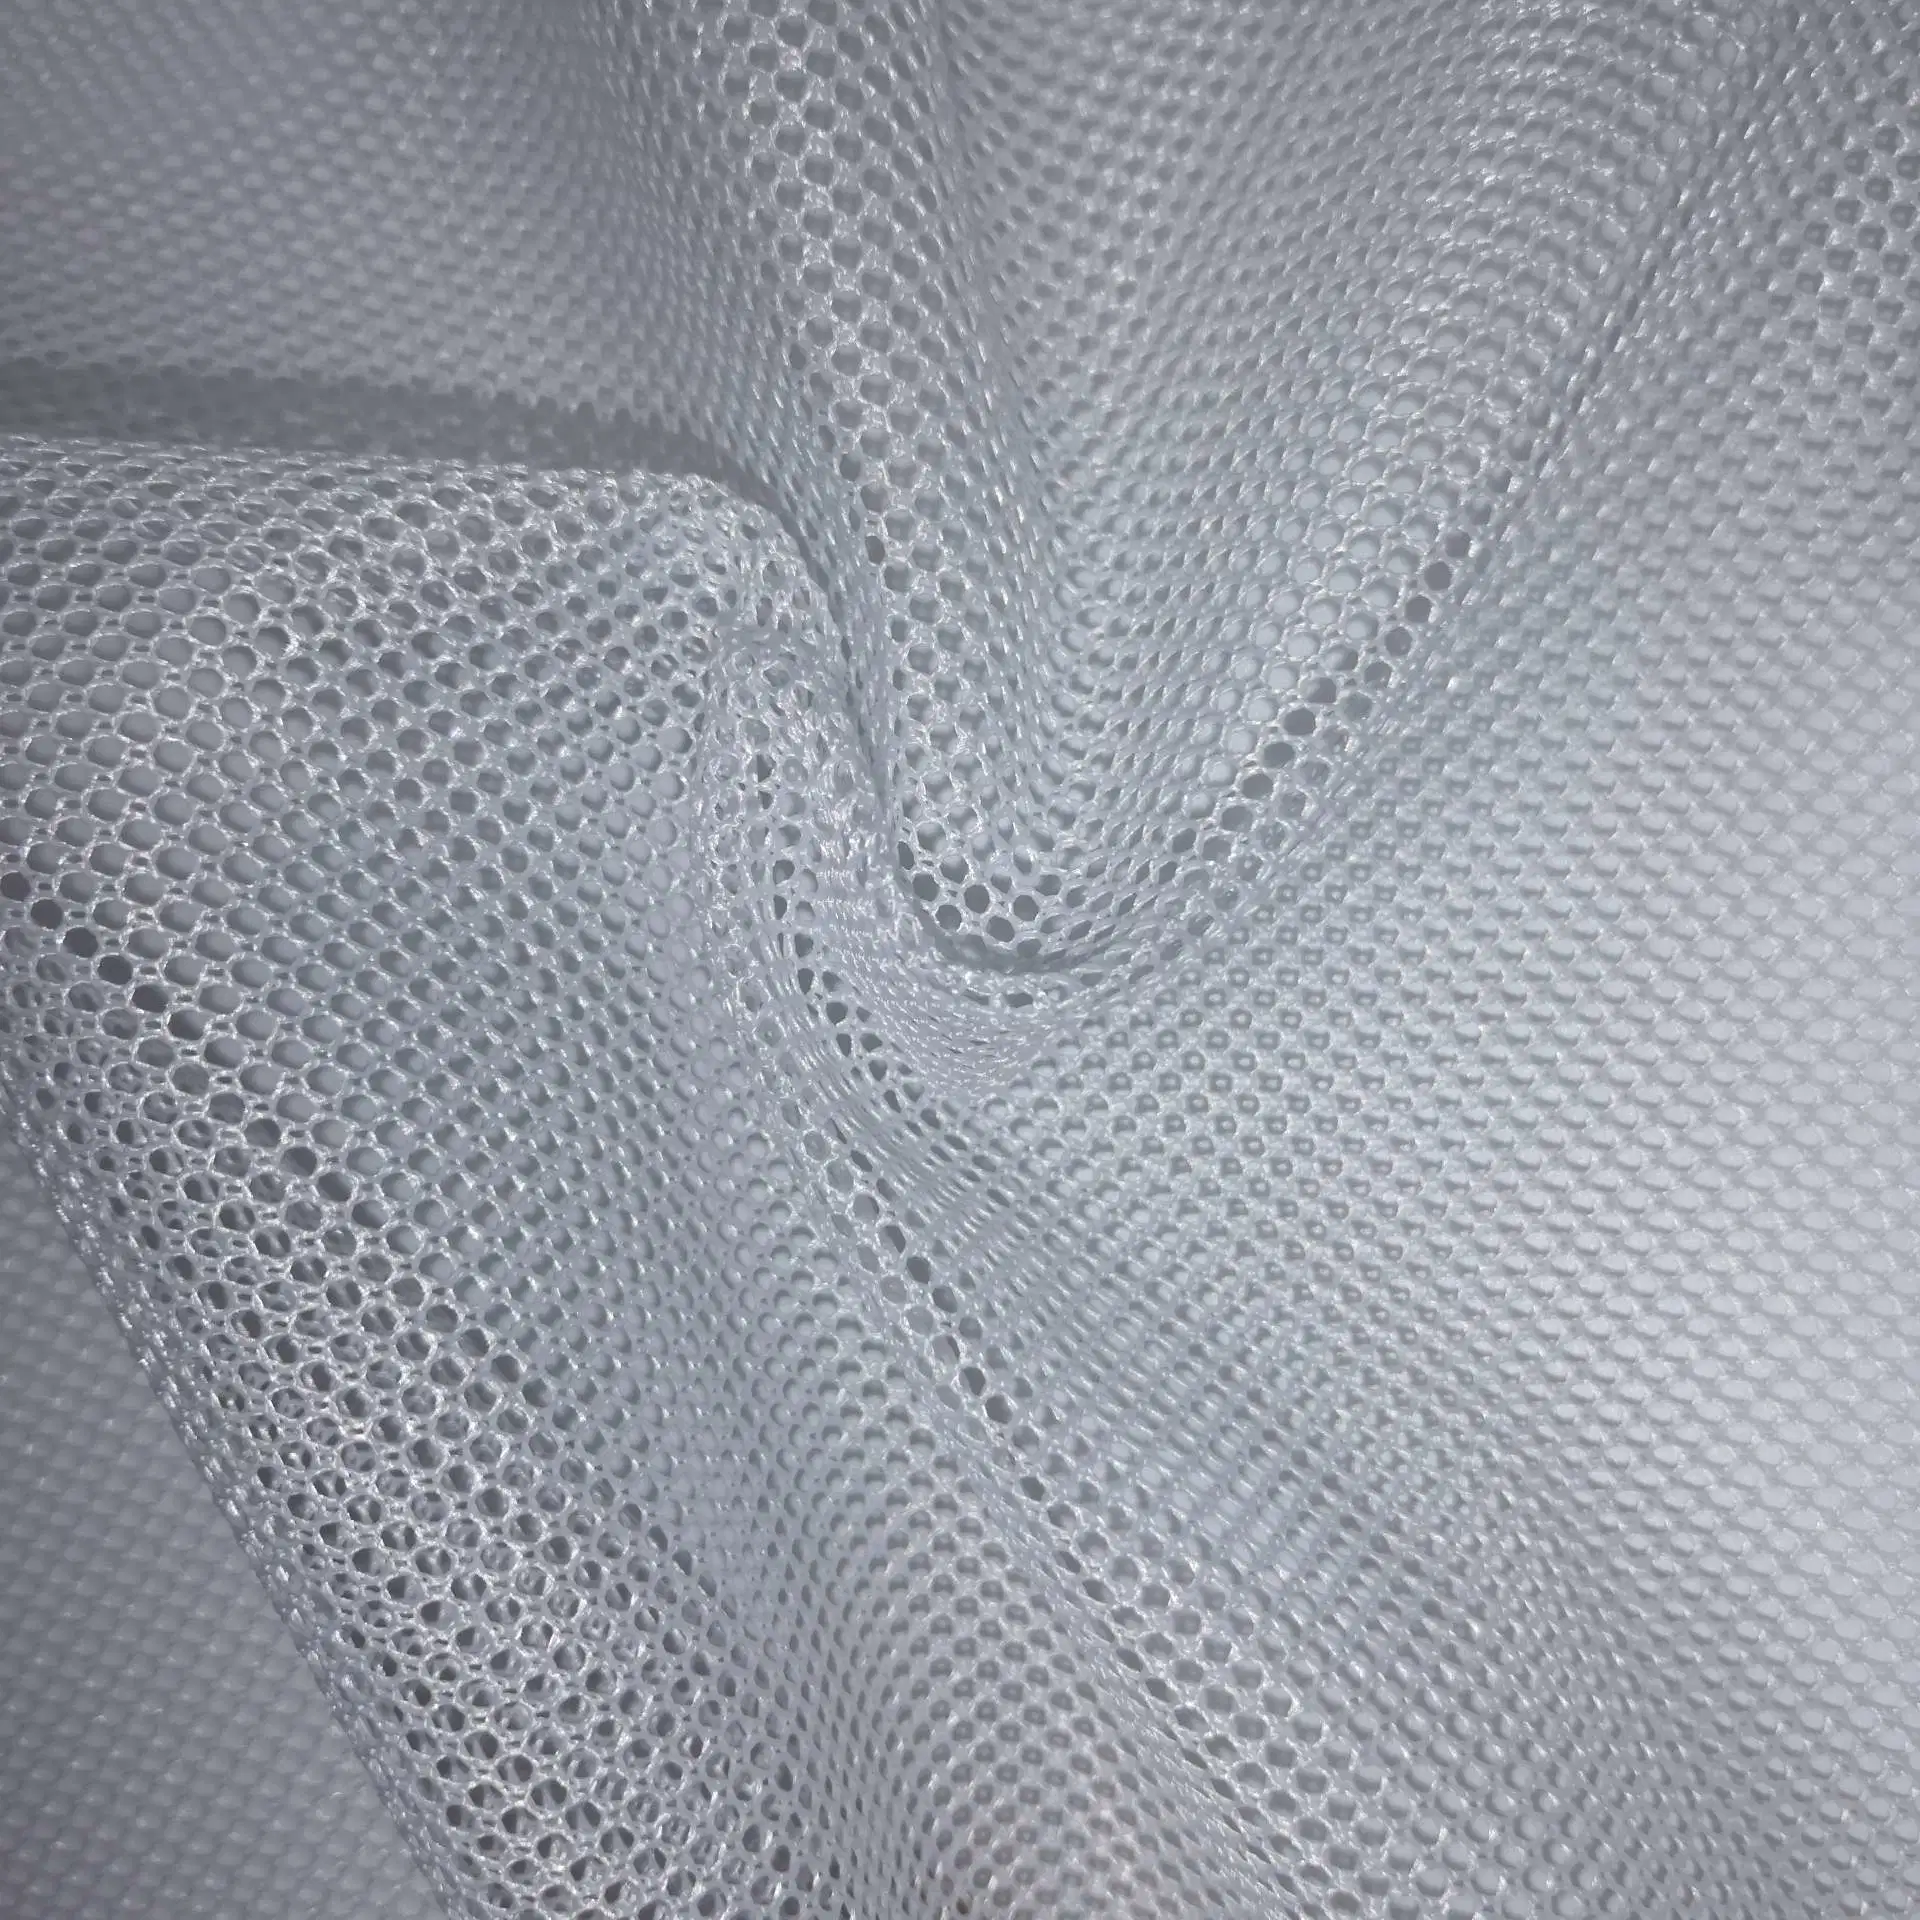 Soft and Wearproof Mesh Fabric 100% Polyester Net/Mesh Knitted Garment/Cap Lining Fabric for Lining